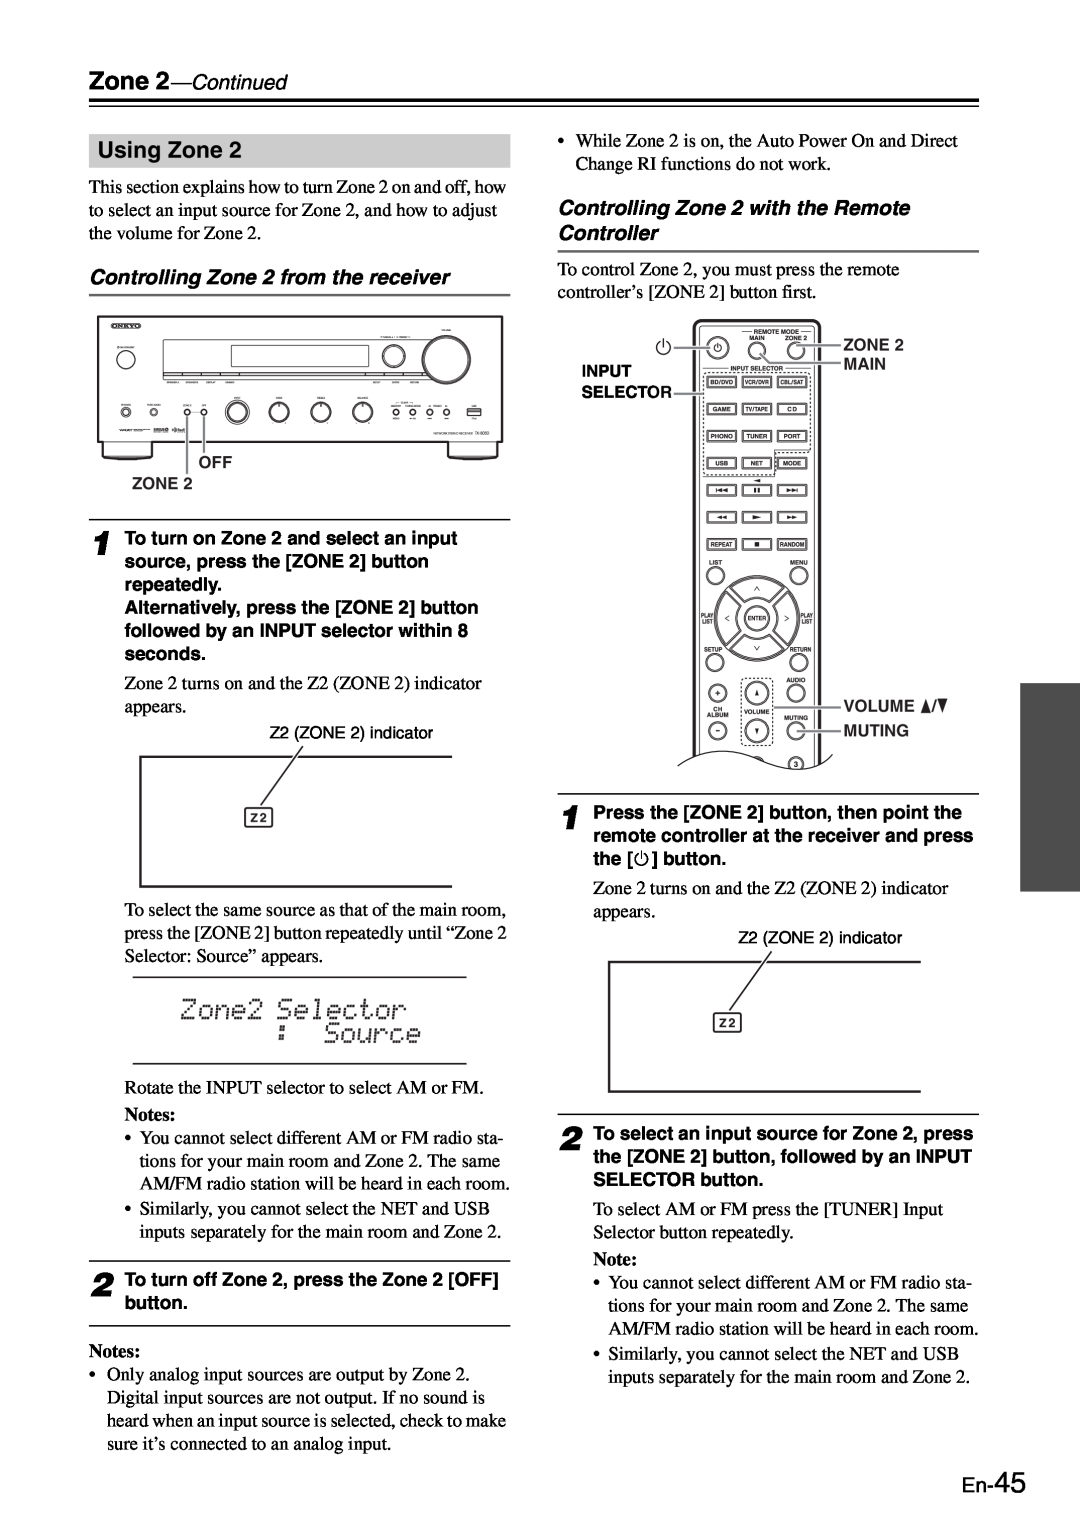 Onkyo TX-8050 instruction manual Using Zone, Zone 2-Continued, Controlling Zone 2 with the Remote Controller, En-45 